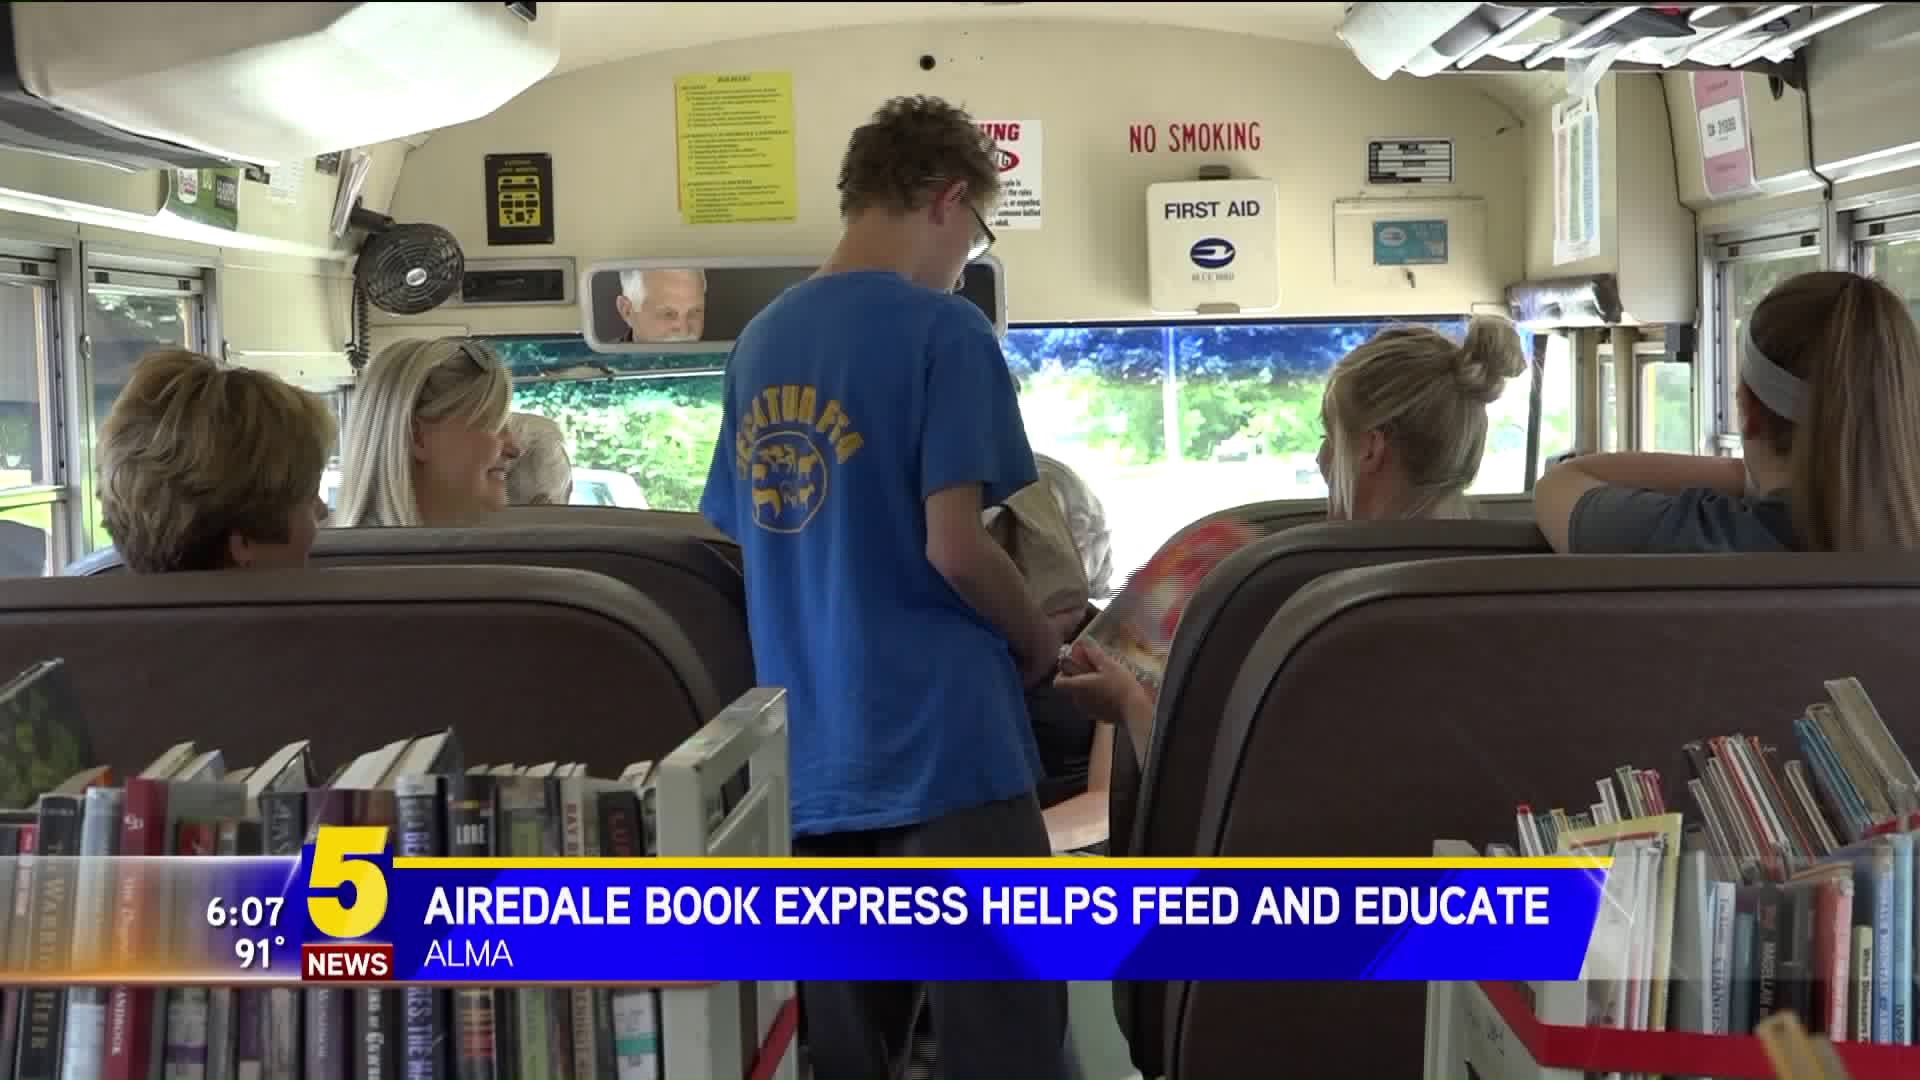 Airedale Book Express